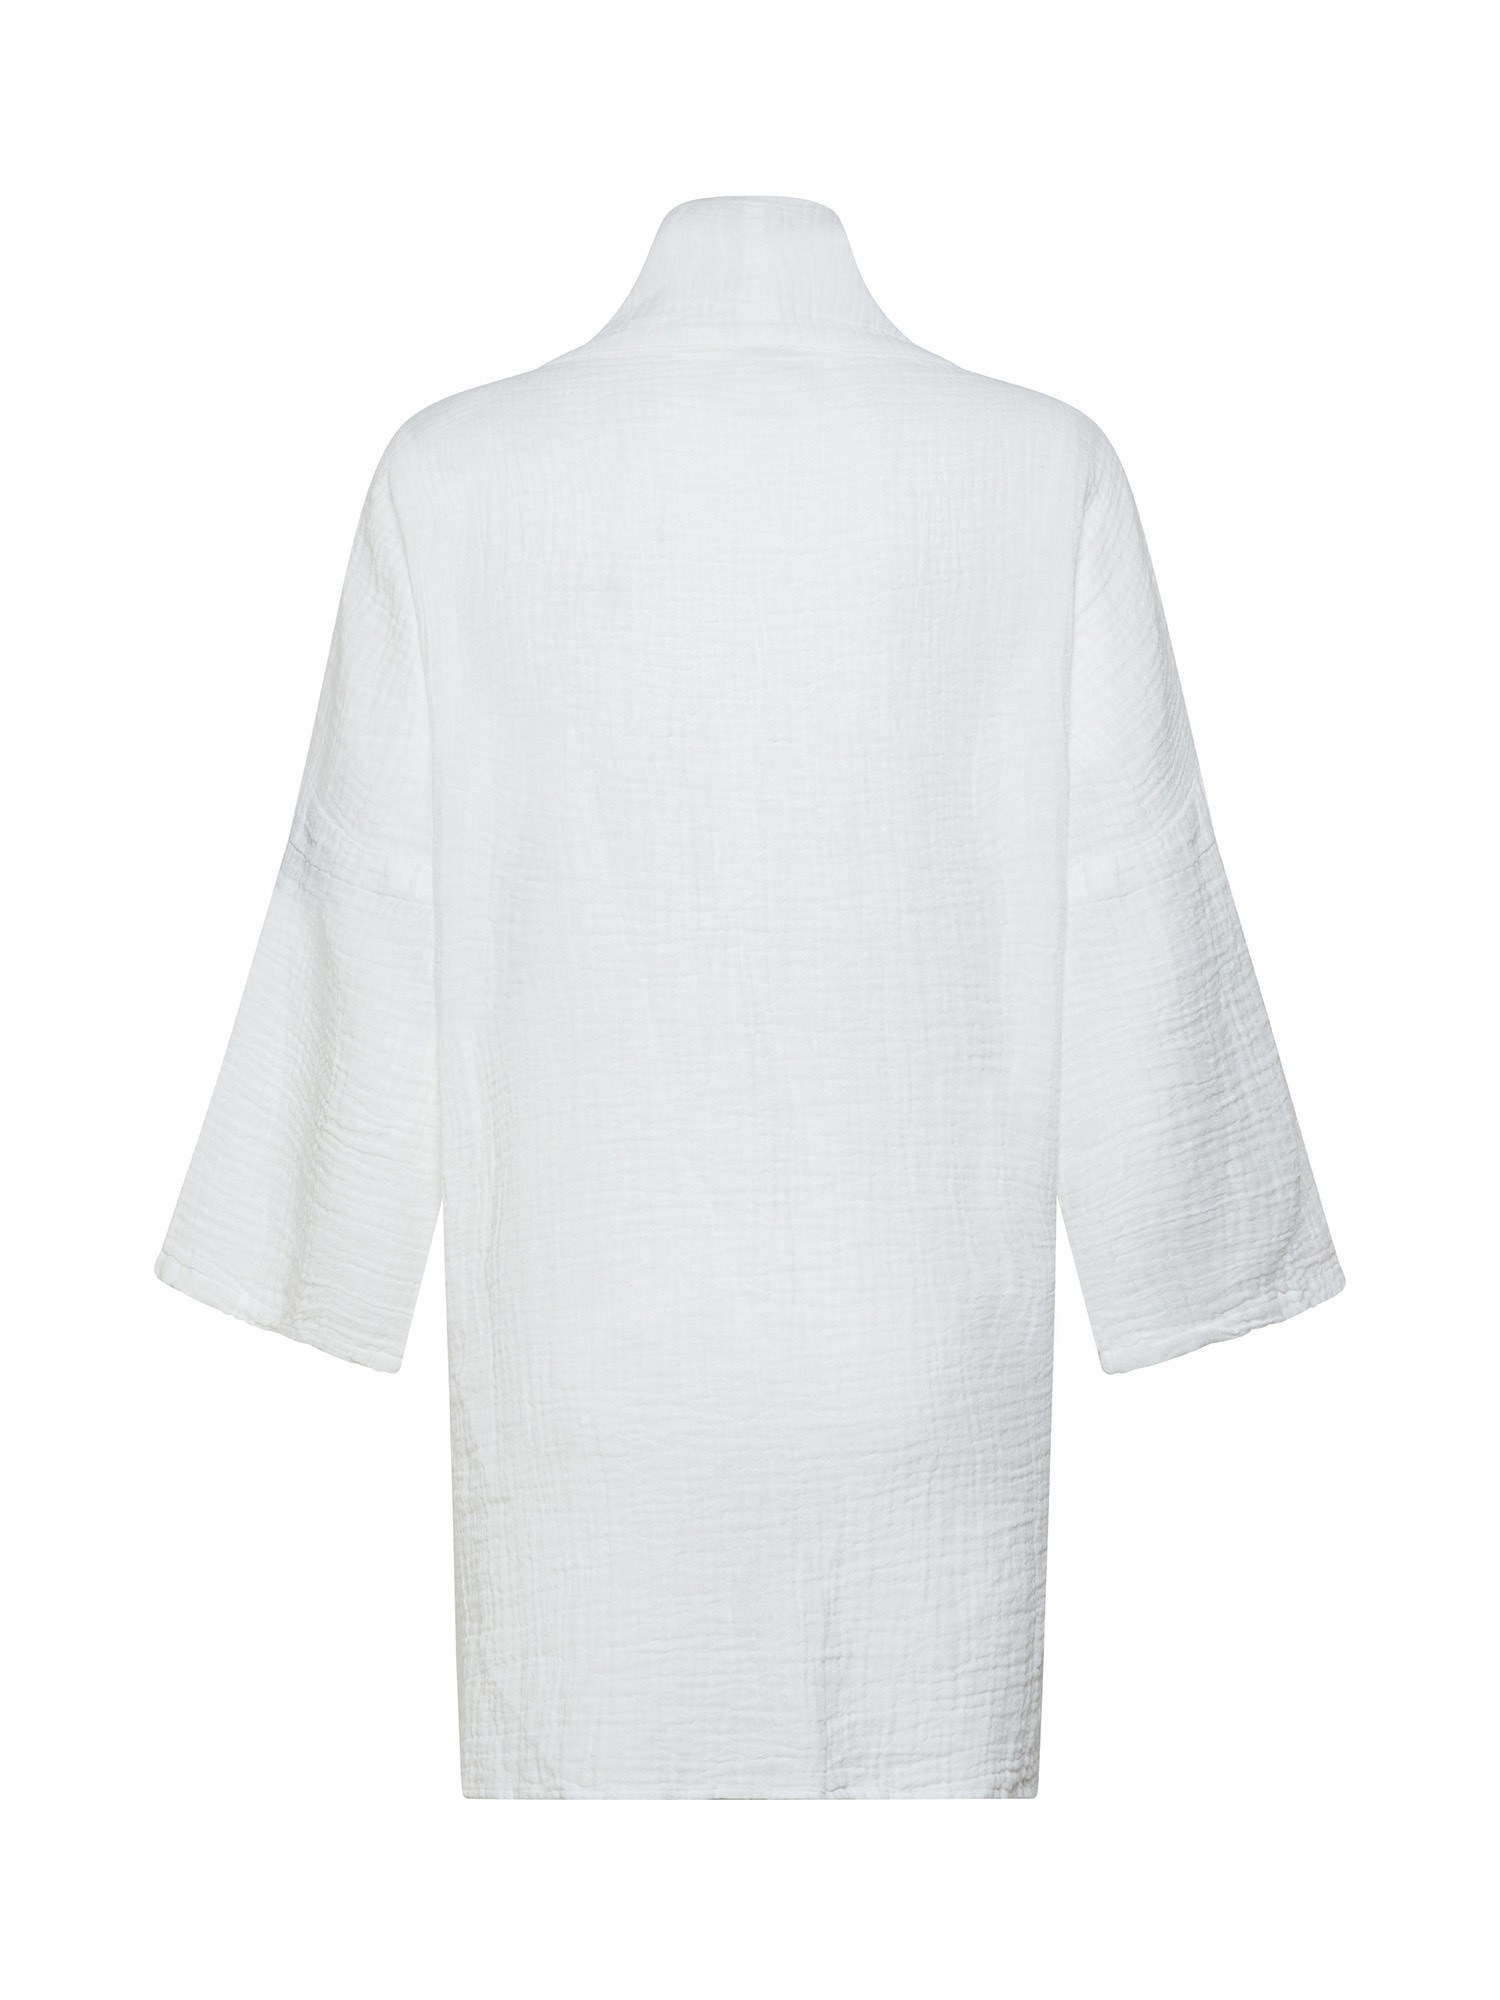 Muslin cover-up with belt and shawl collar, White, large image number 1